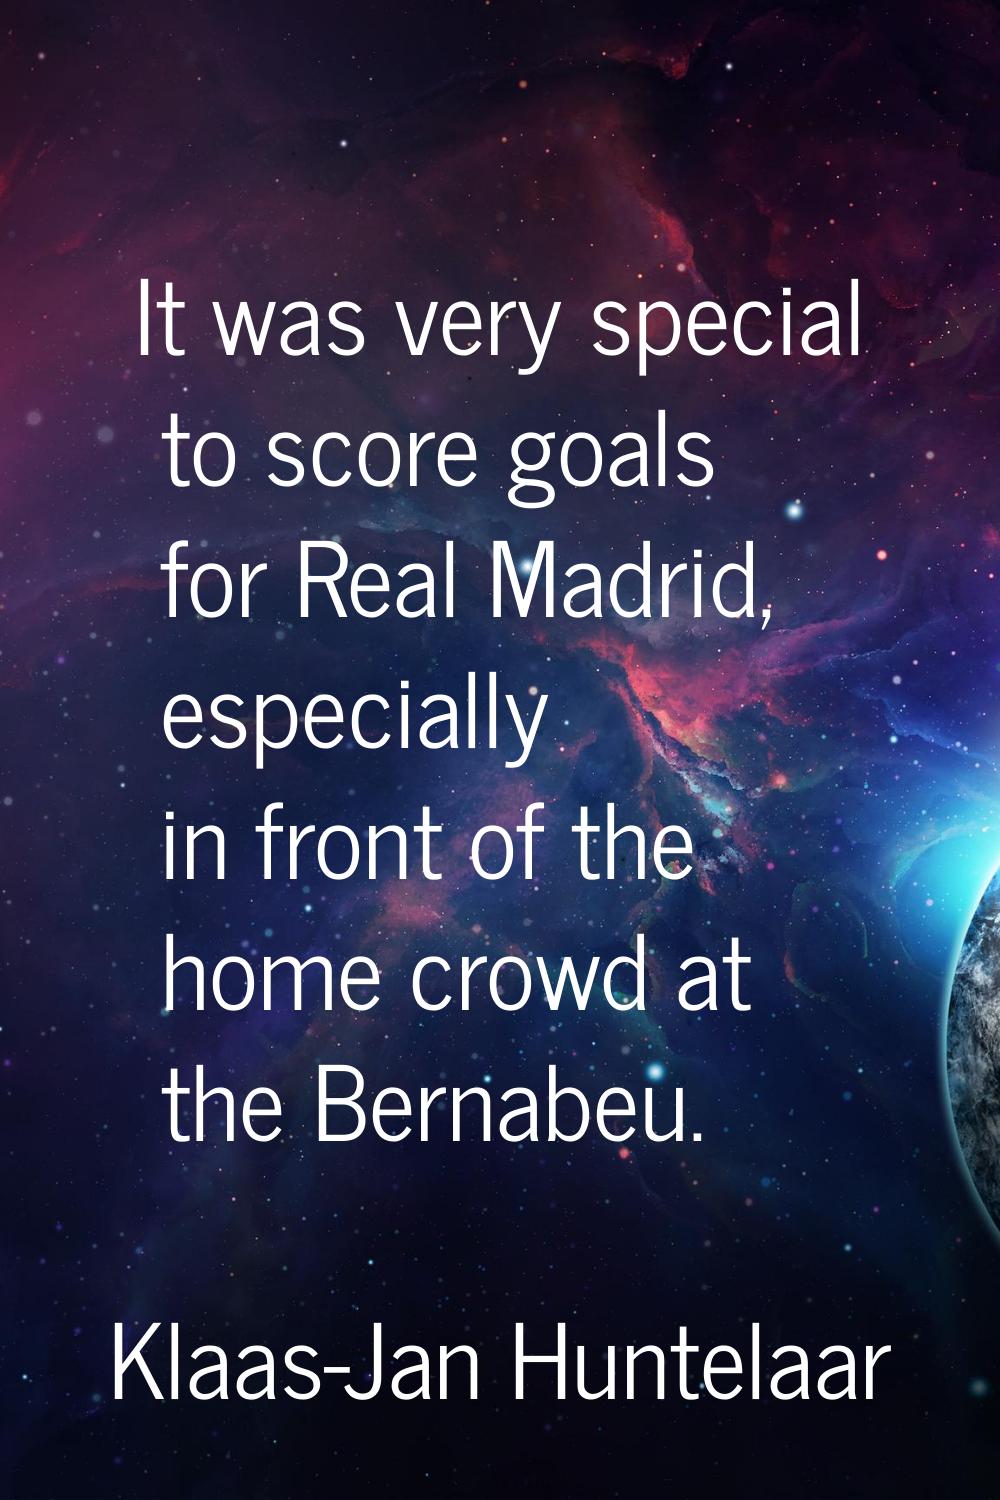 It was very special to score goals for Real Madrid, especially in front of the home crowd at the Be